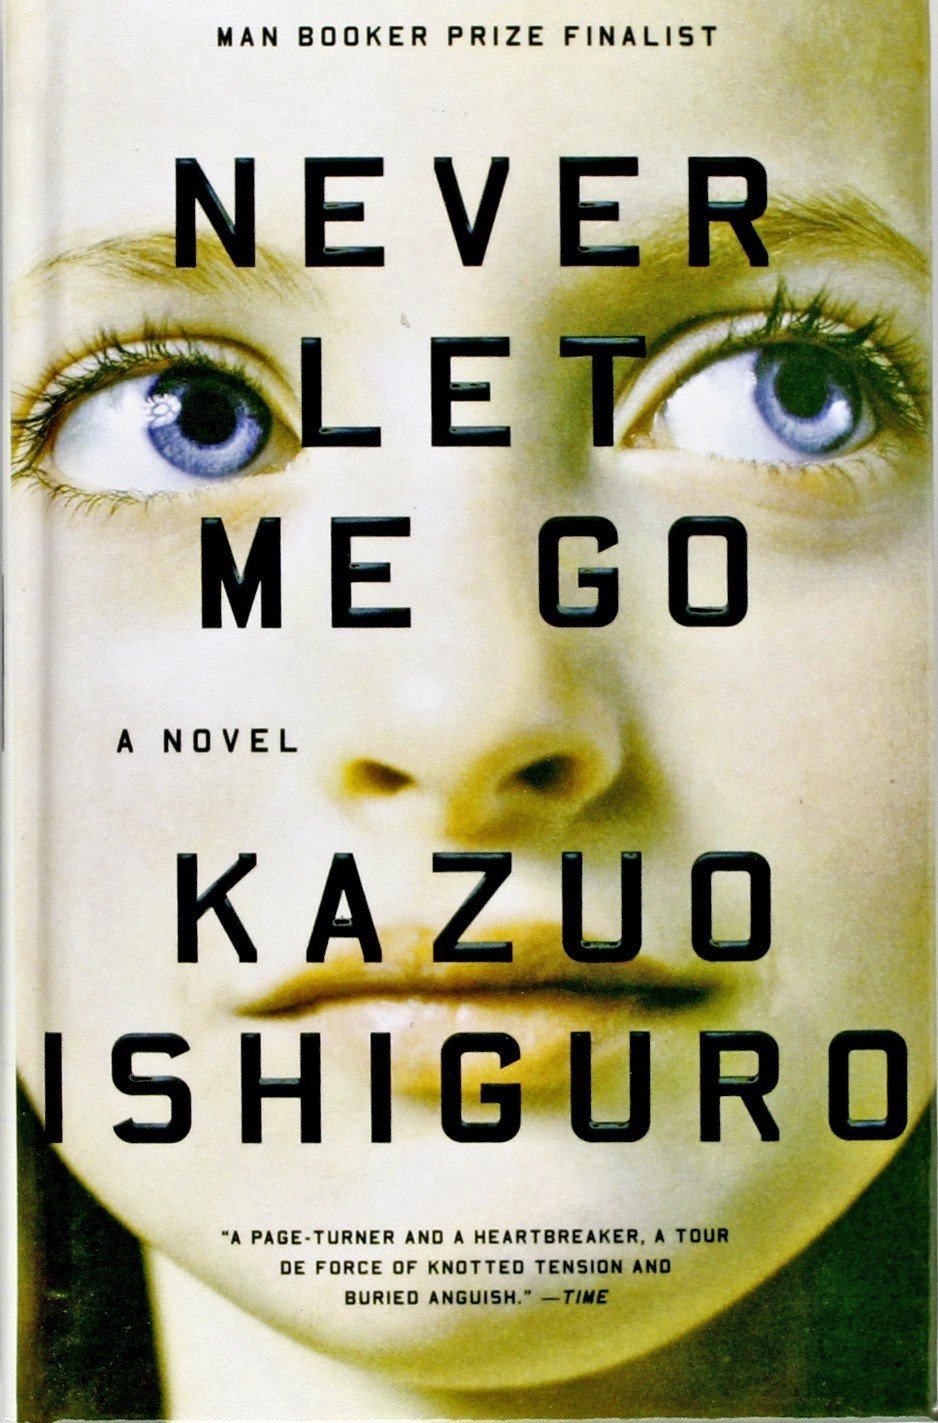 Close-up of &#x27;Never Let Me Go&#x27; book cover by Kazuo Ishiguro, featuring title and author&#x27;s name with a pair of eyes